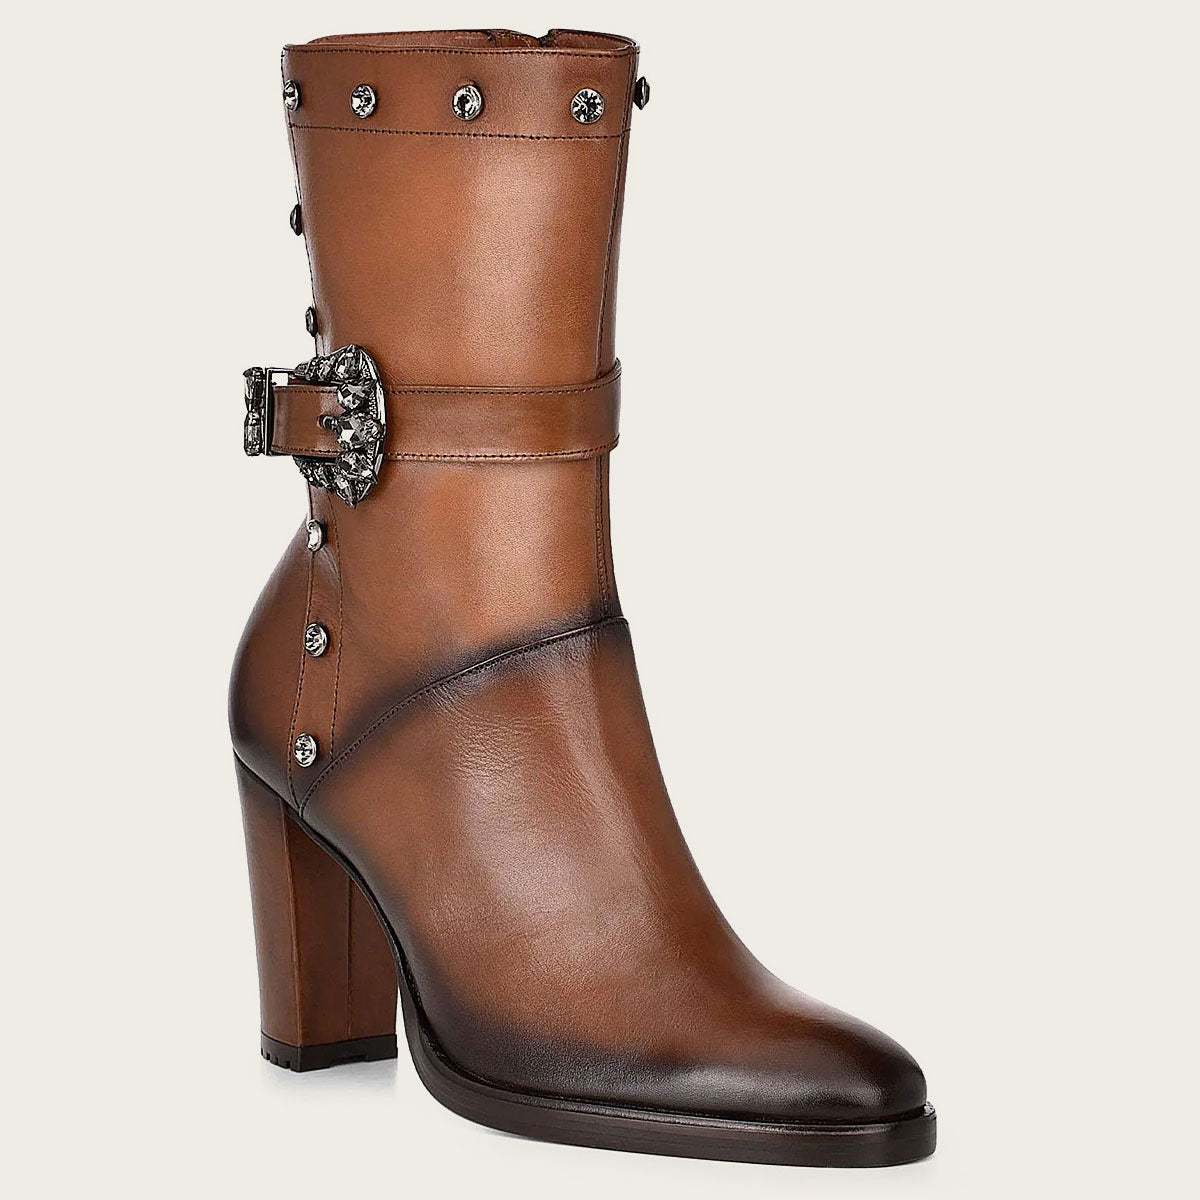 Women's Bovine Leather Booties with Crystal Applications and Metallic Buckle.